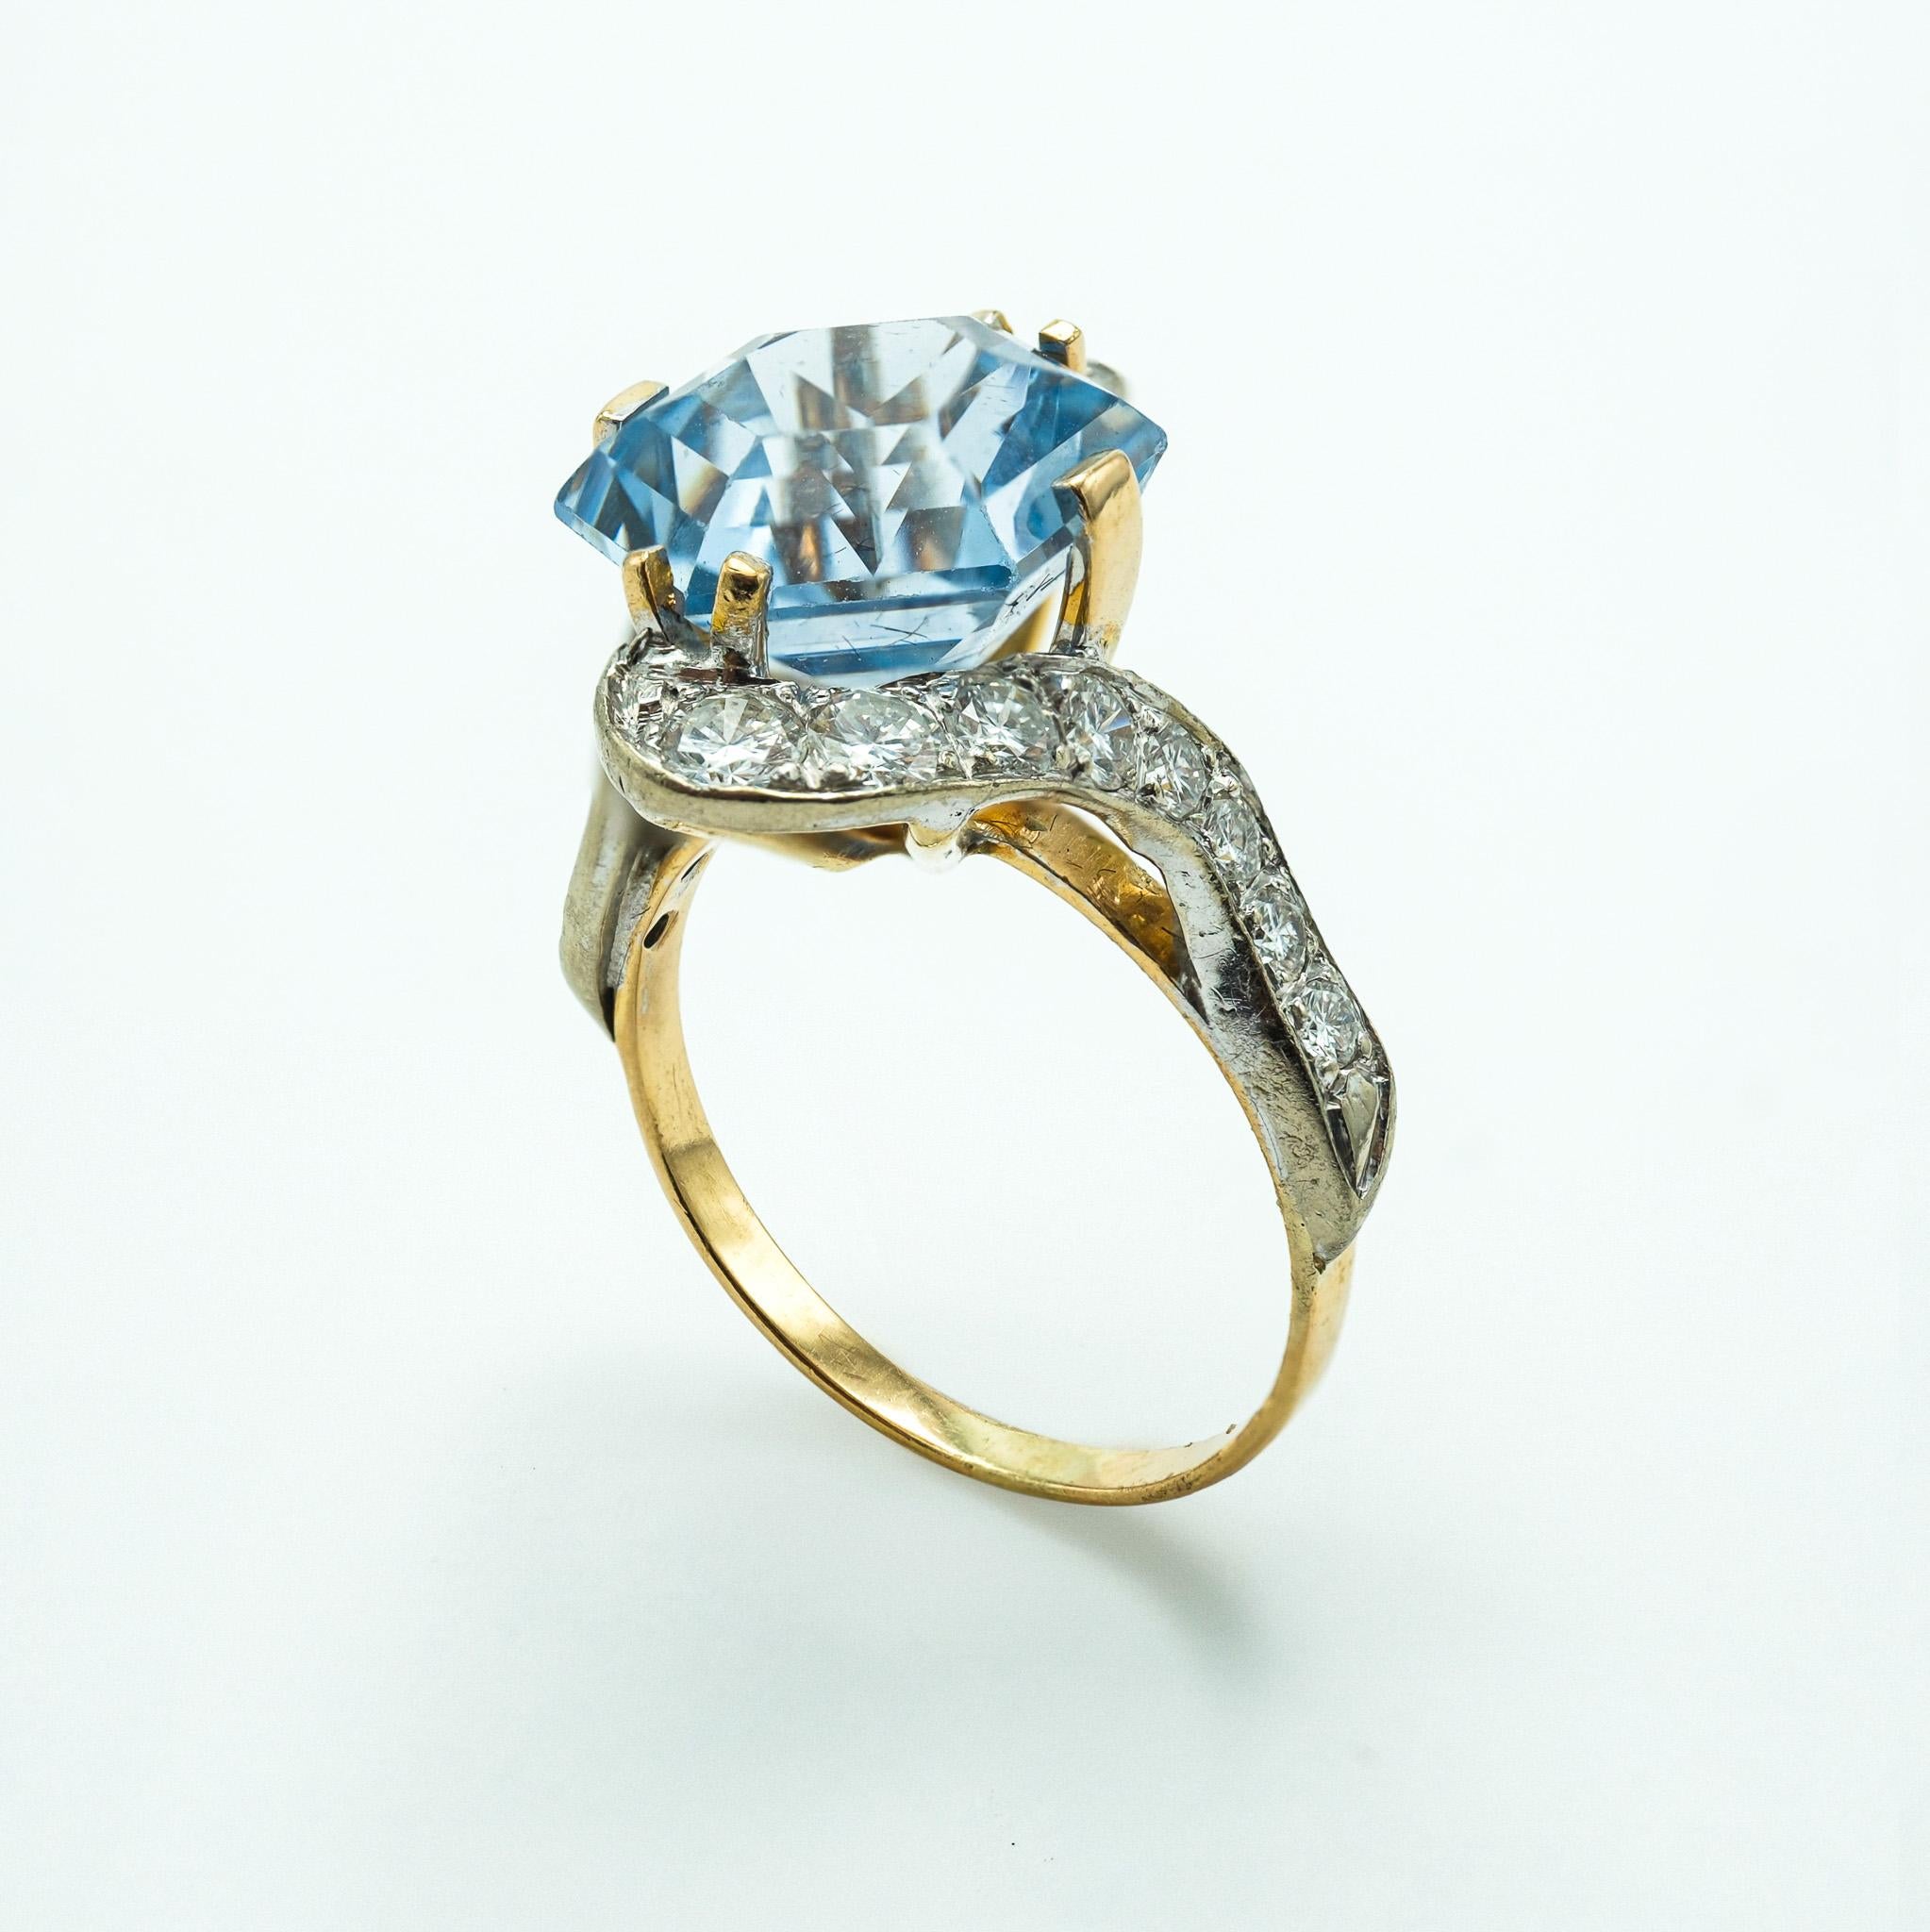 14 Karat Yellow Gold Topaz and Diamond Ring with 6.5 Carat Hexagon Stone In Good Condition For Sale In Fairfield, CT